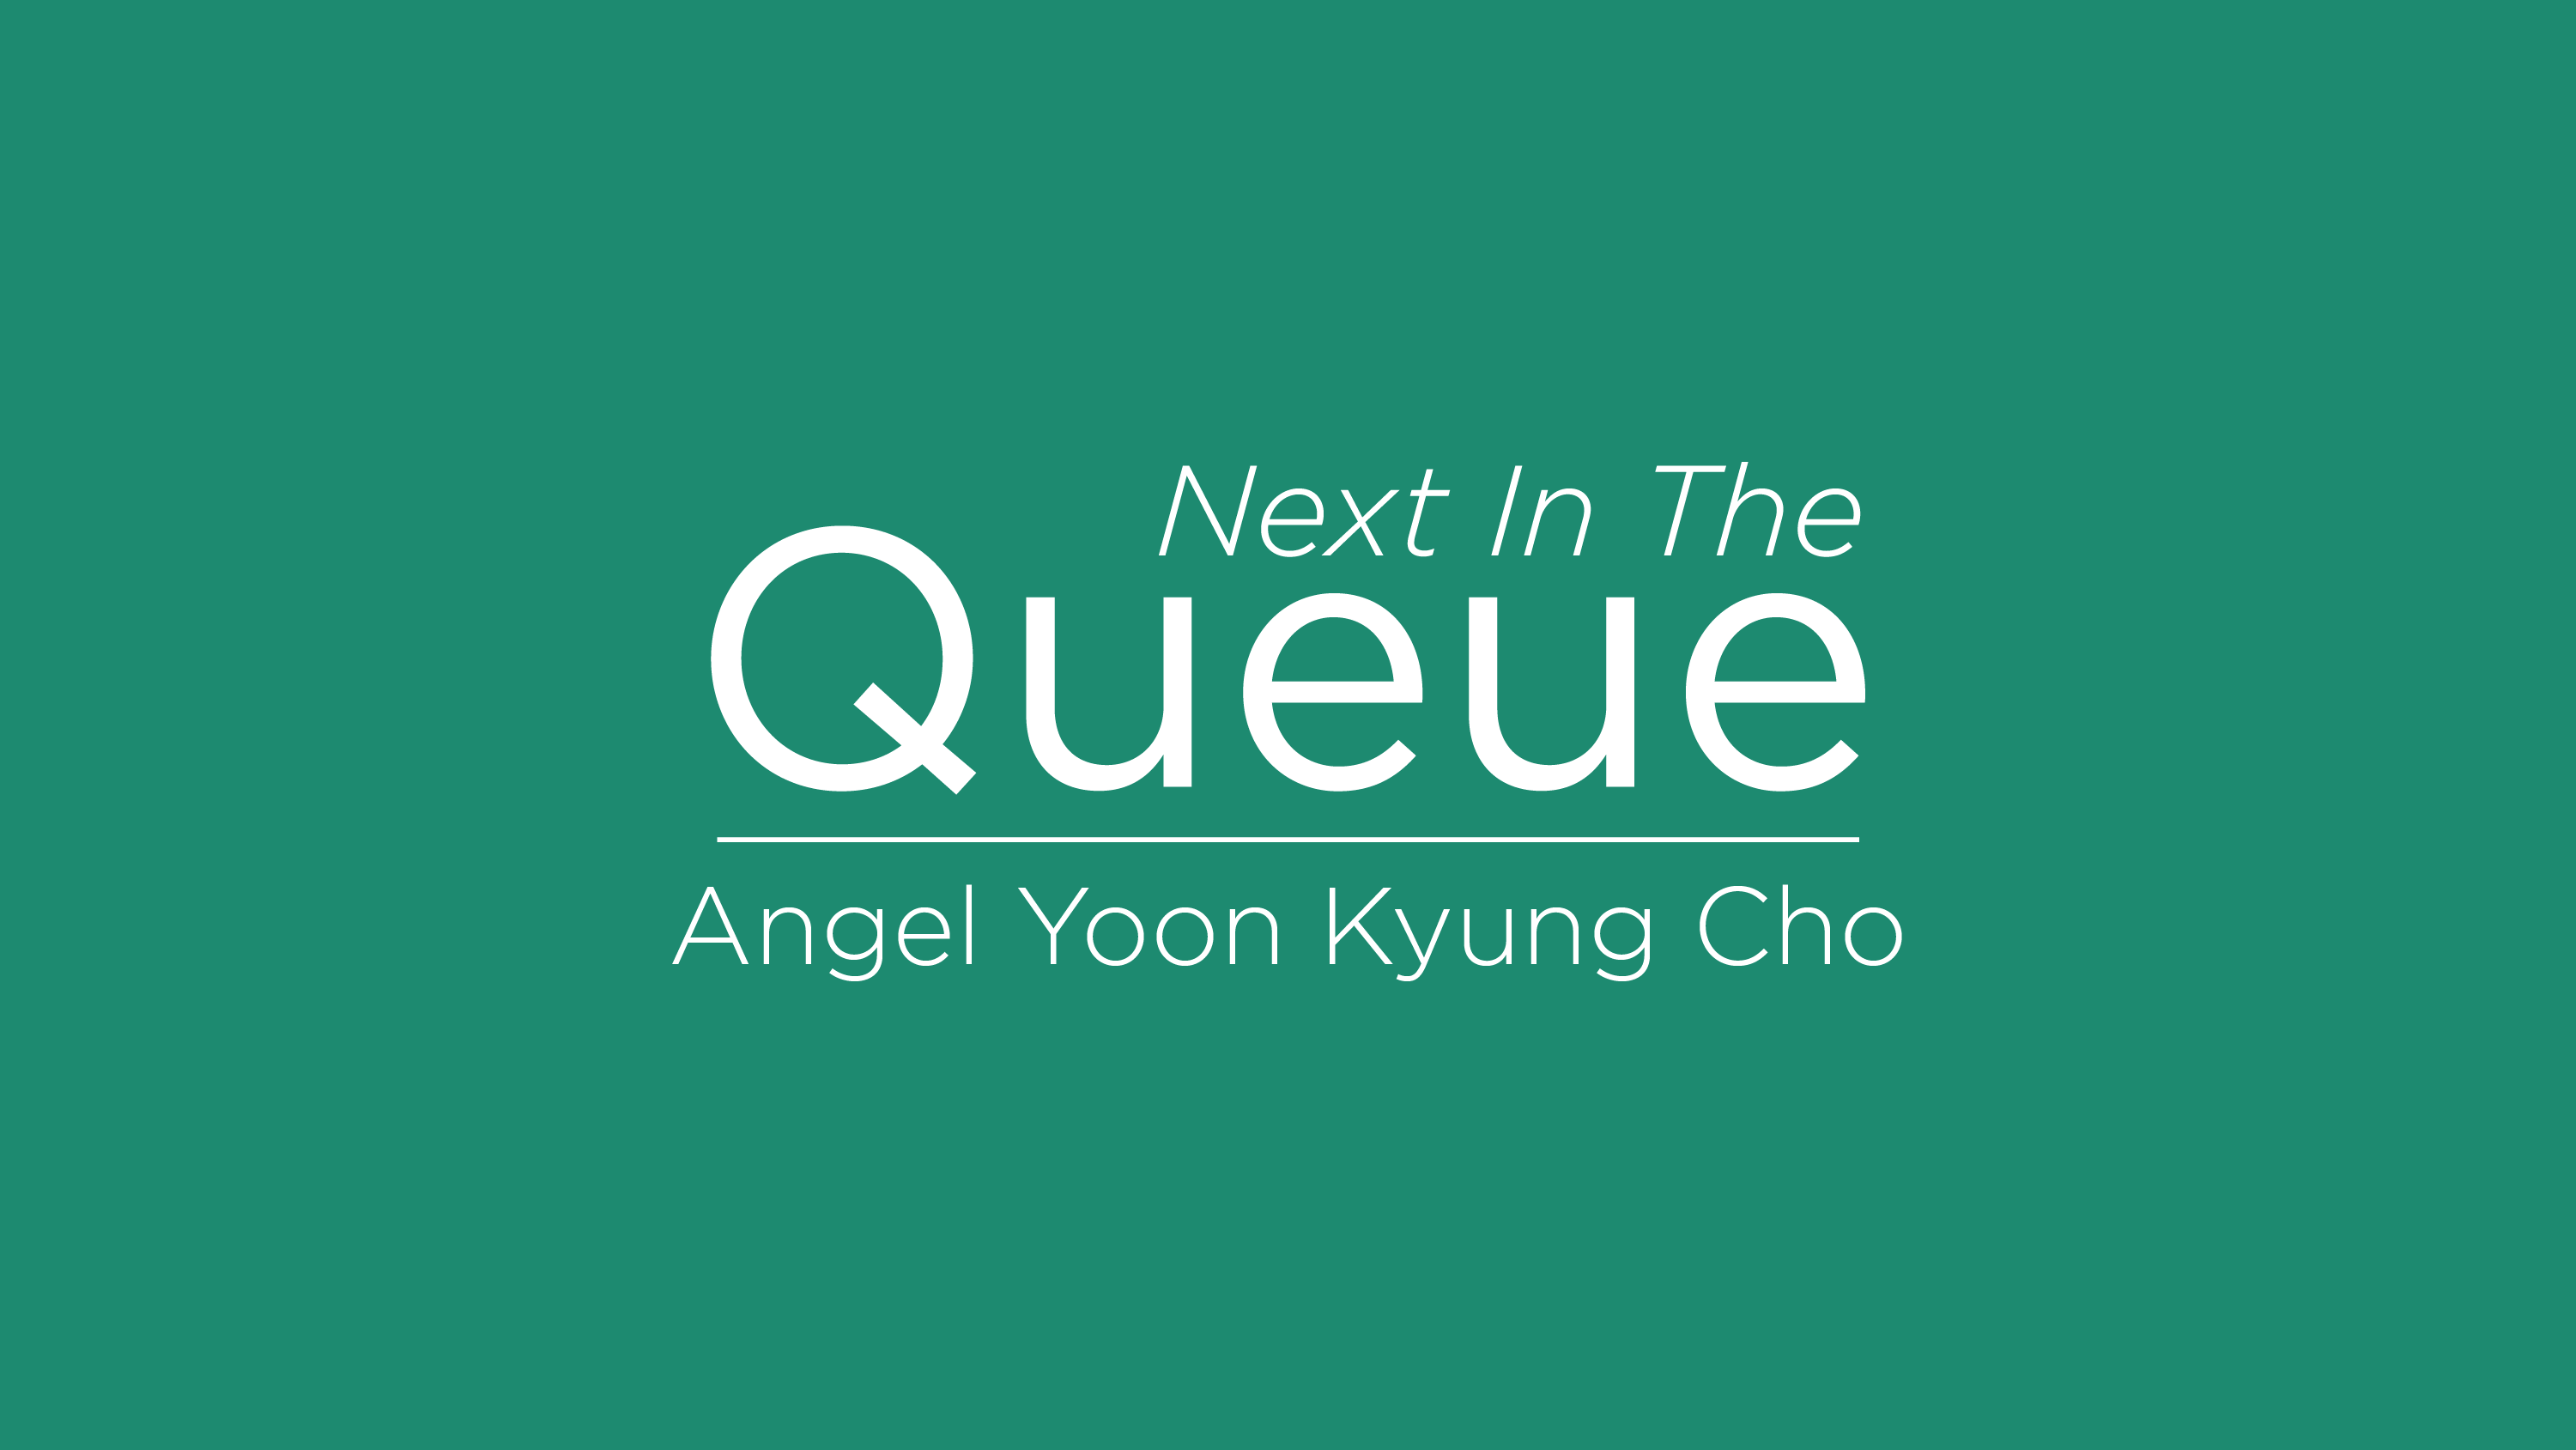 blog post cover graphic for The Queue featuring Angel Yoon Kyung Cho